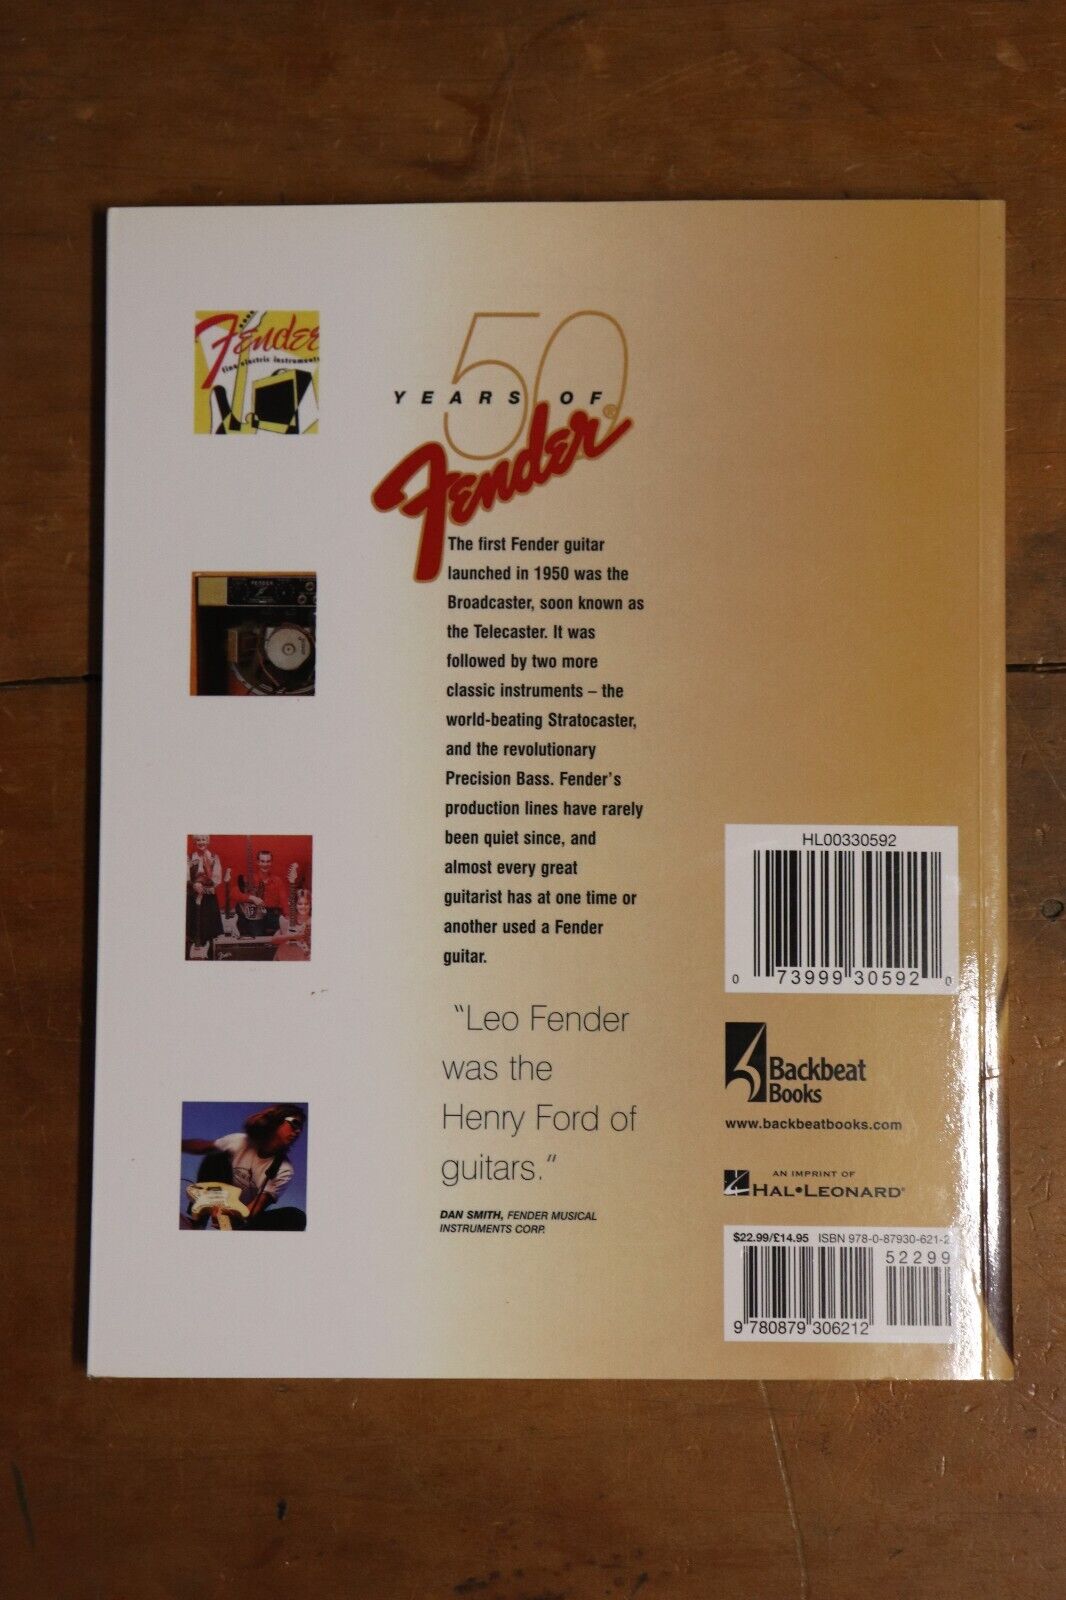 50 Years Of Fender by Tony Bacon - 2005 - Fender Guitar Reference Book